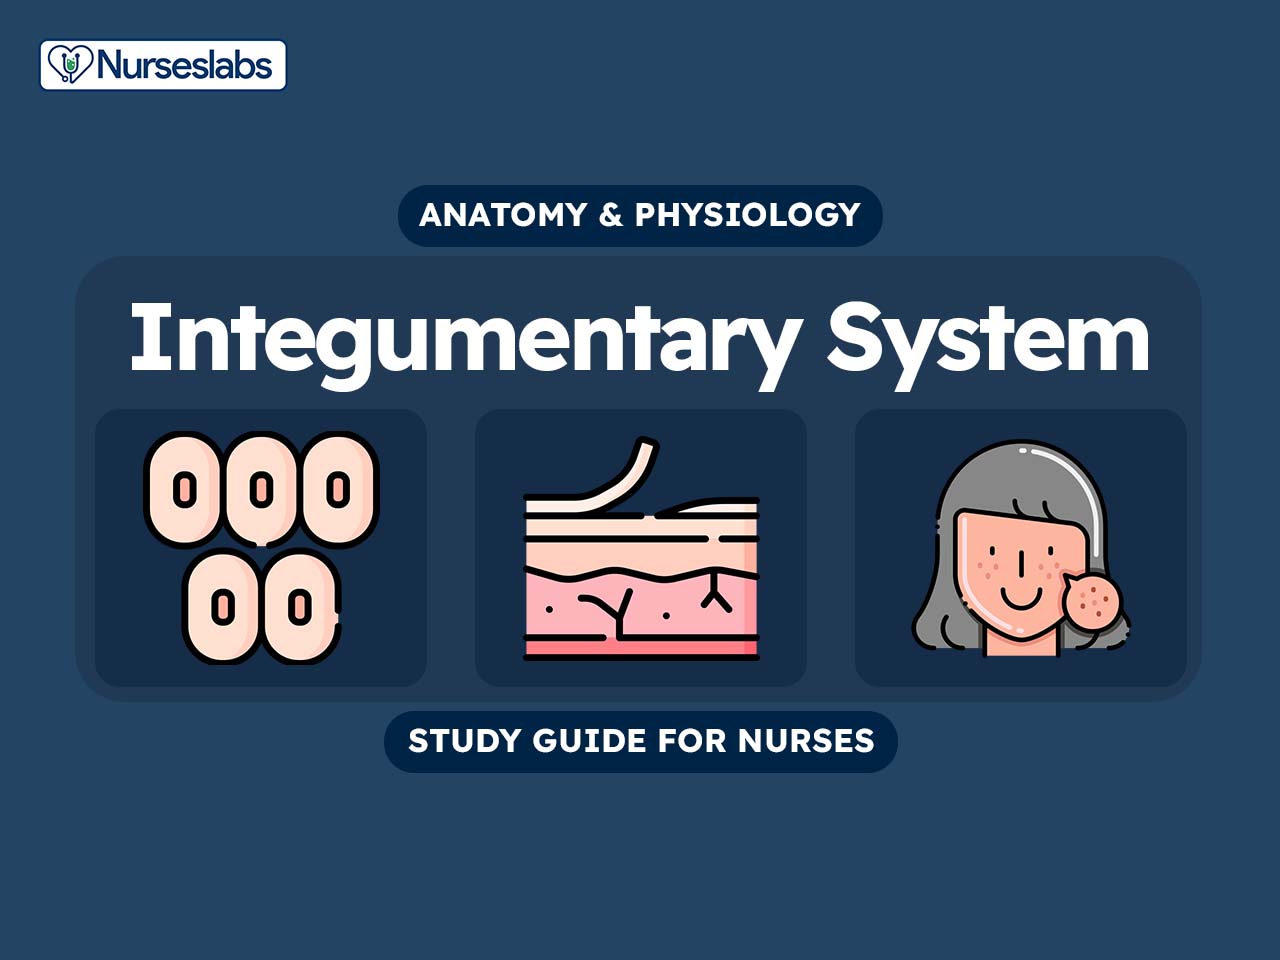 V2 Integumentary System Anatomy and Physiology Nursing Study Guide